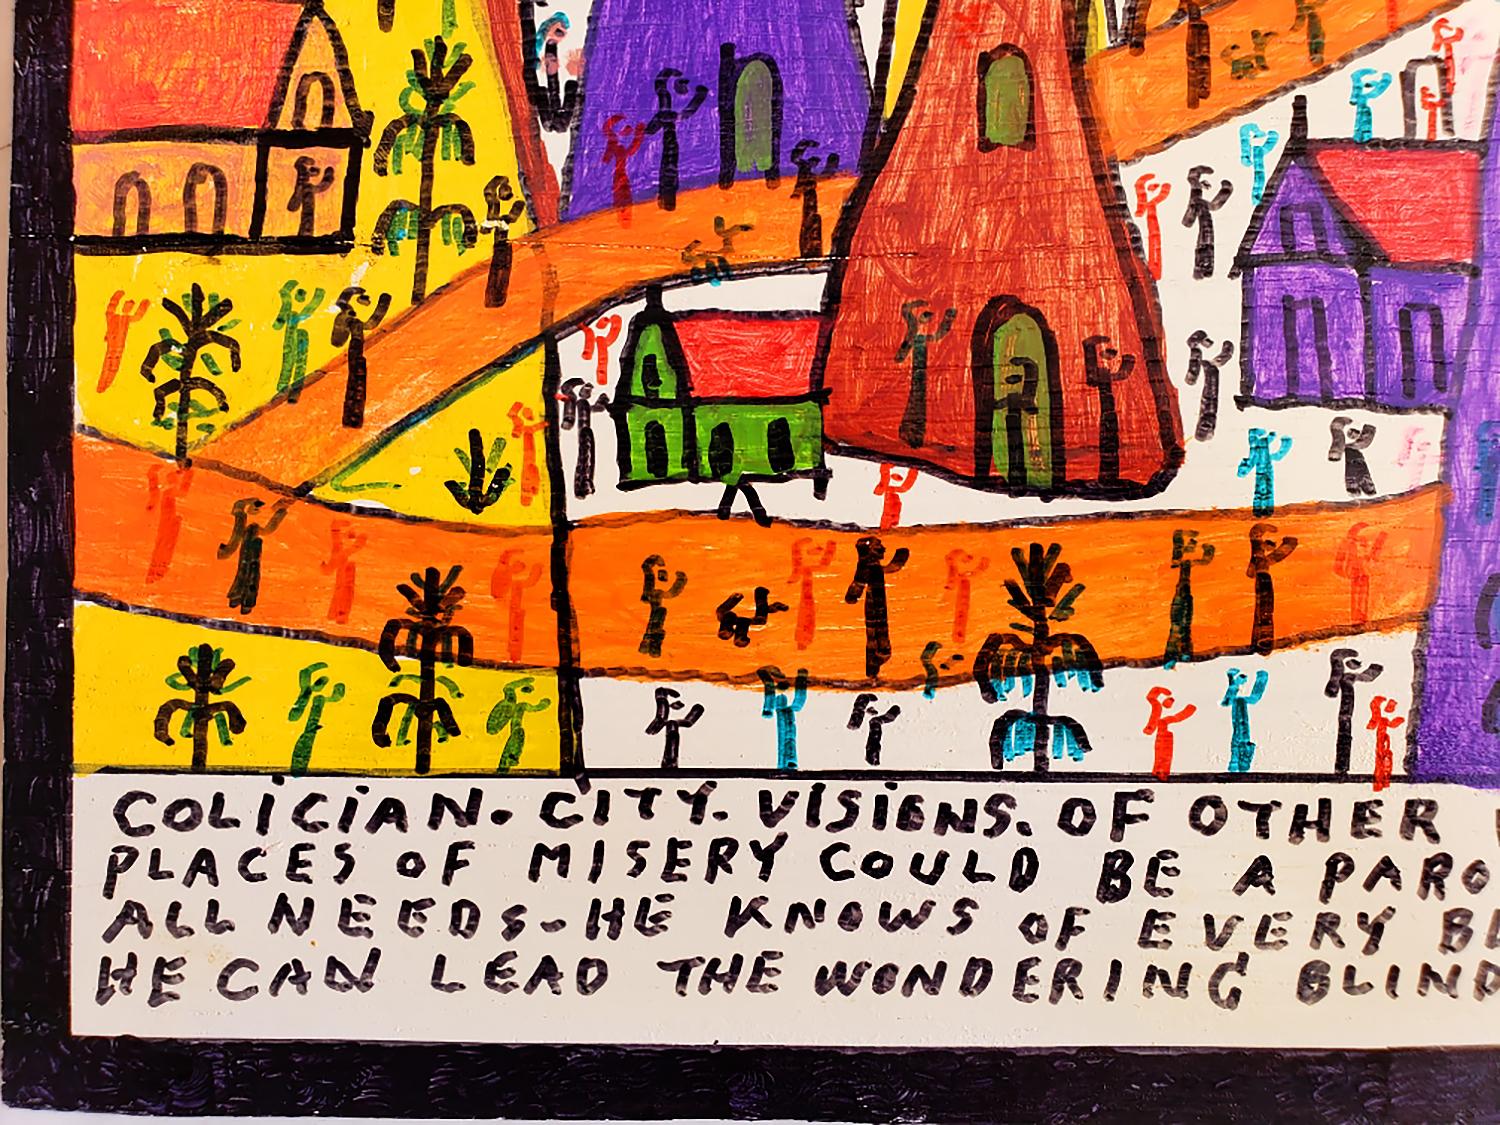  	 Howard Finster American, 1916–2001 Colician City, Visions of Other Worlds 1